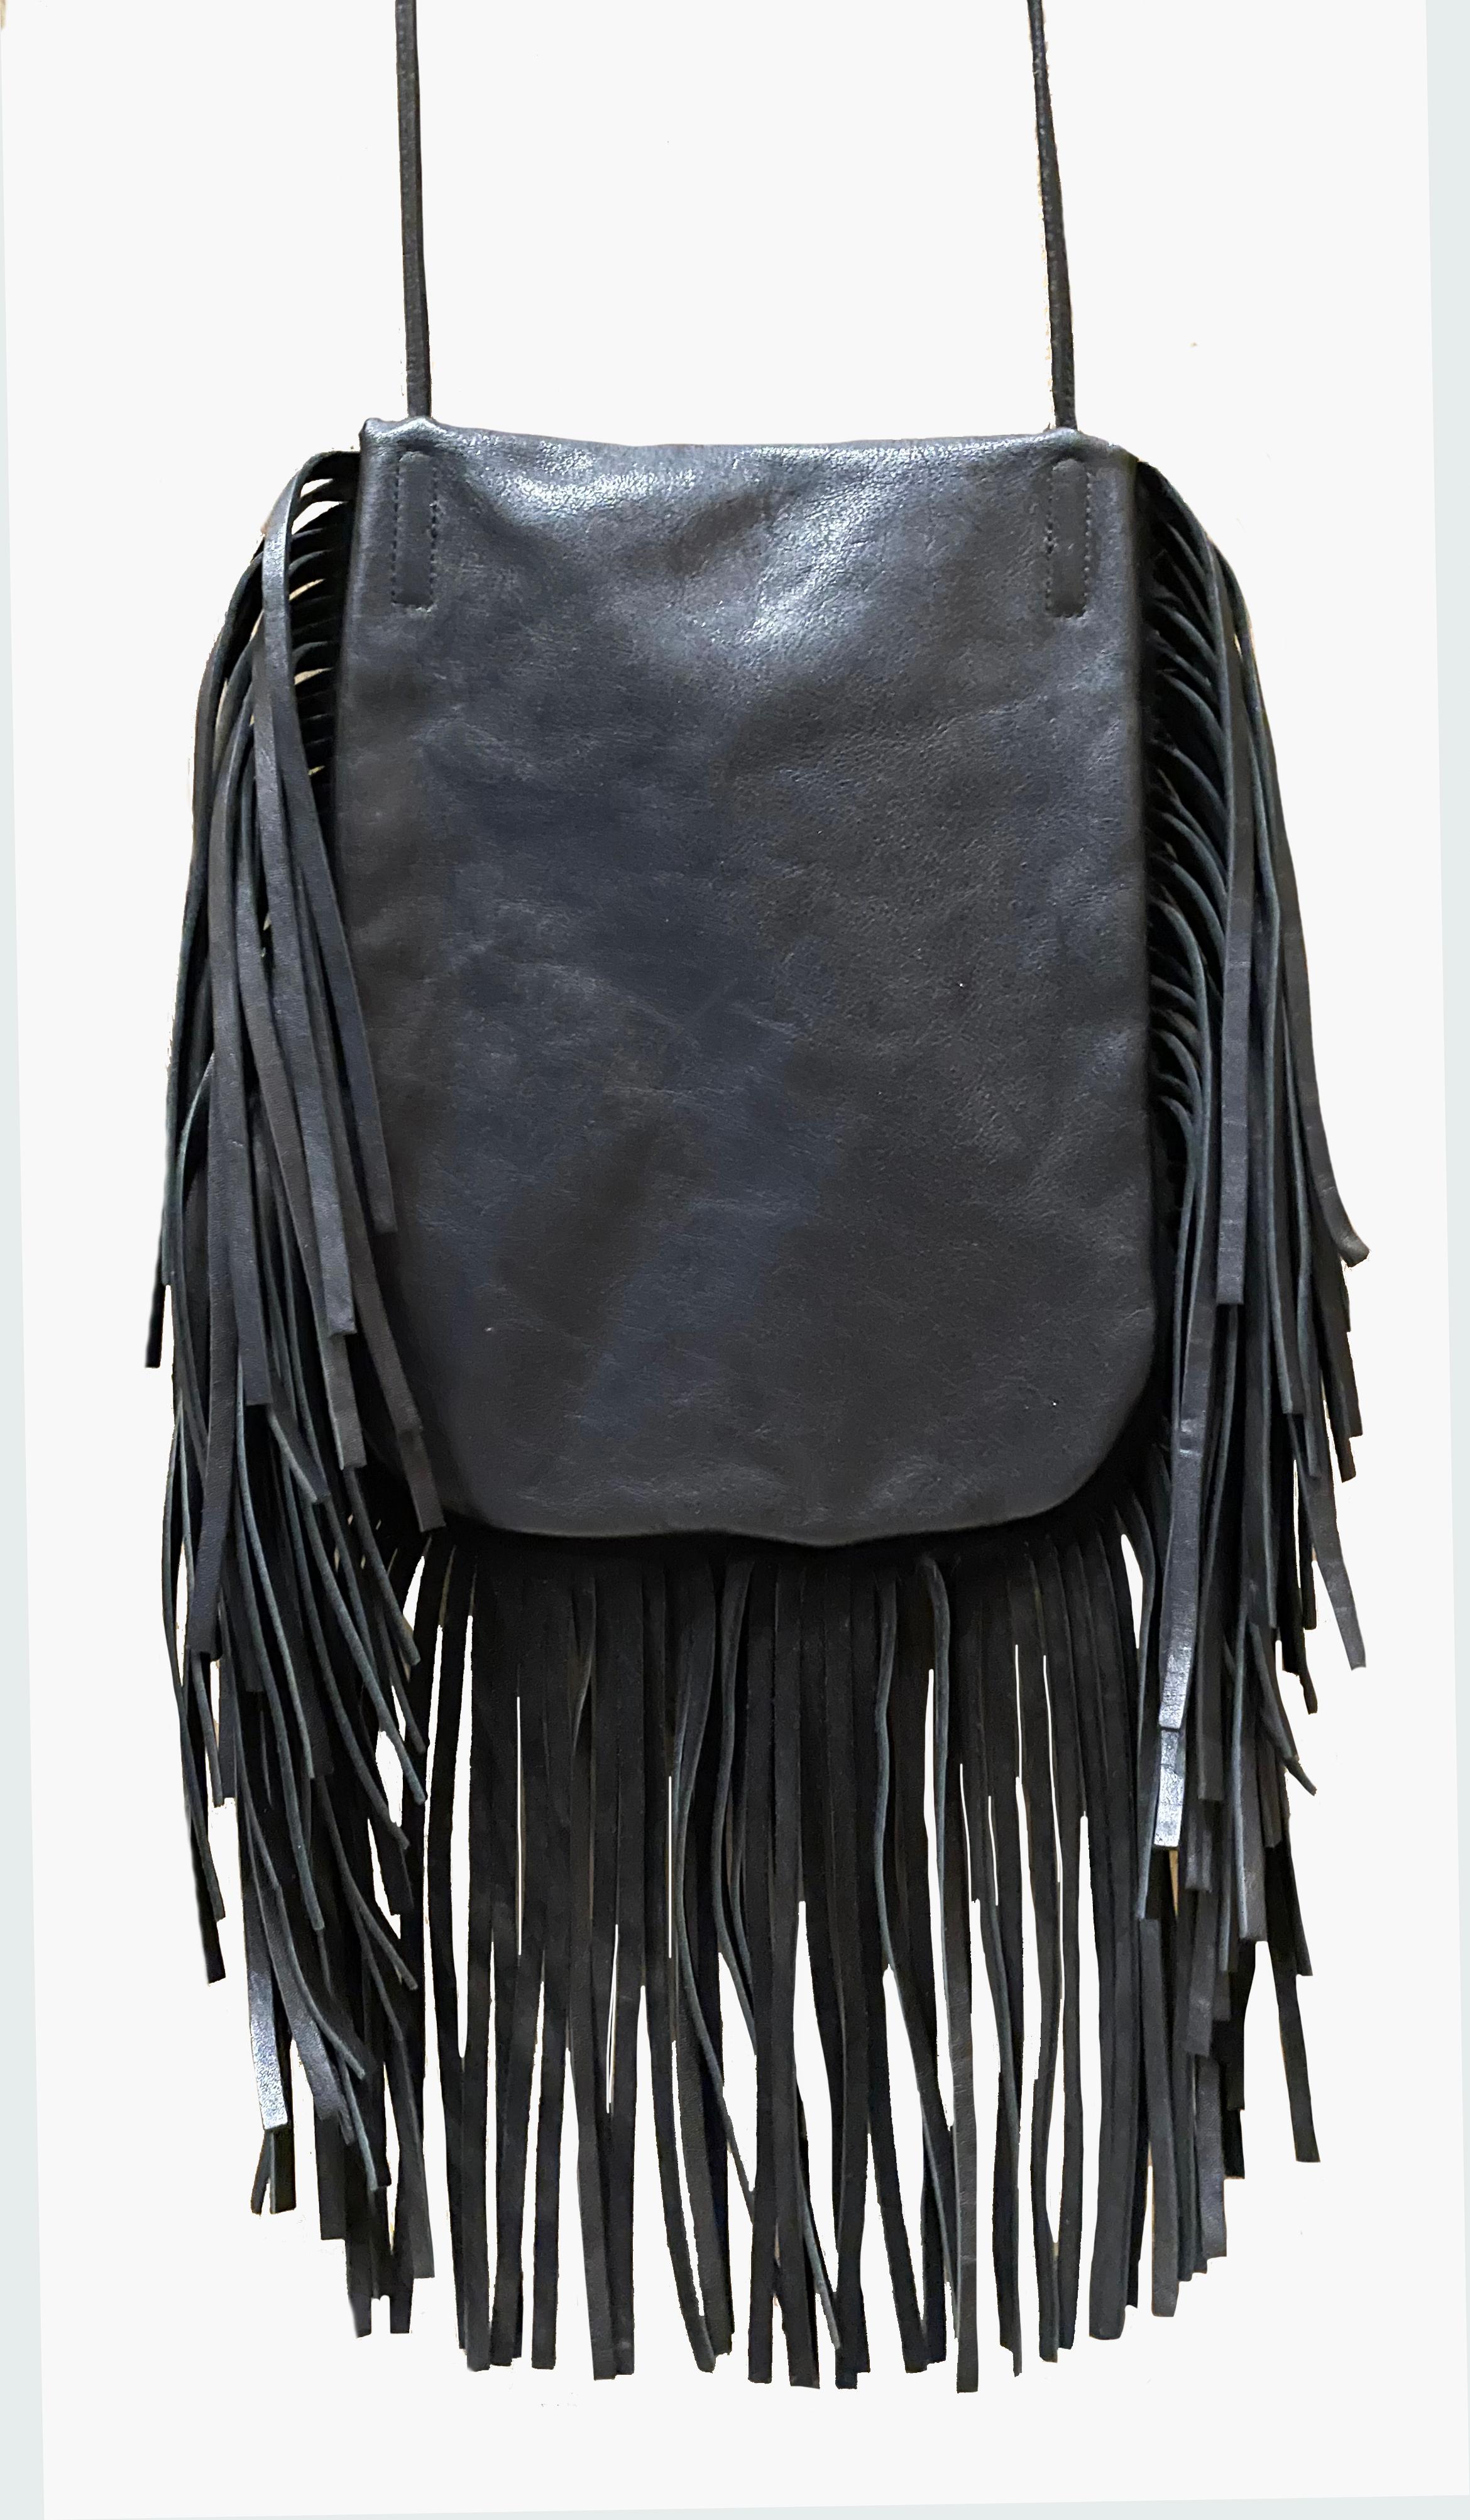 
Leather cross-body bag by Saint Laurent with a silver-tone hardware and YSL logo. In a bohemian style. Decorated with fringe. Long strap. Opens with a flap and tassels with chain and YSL logo. Lined in black suede. 
Period: 2000s
Length: